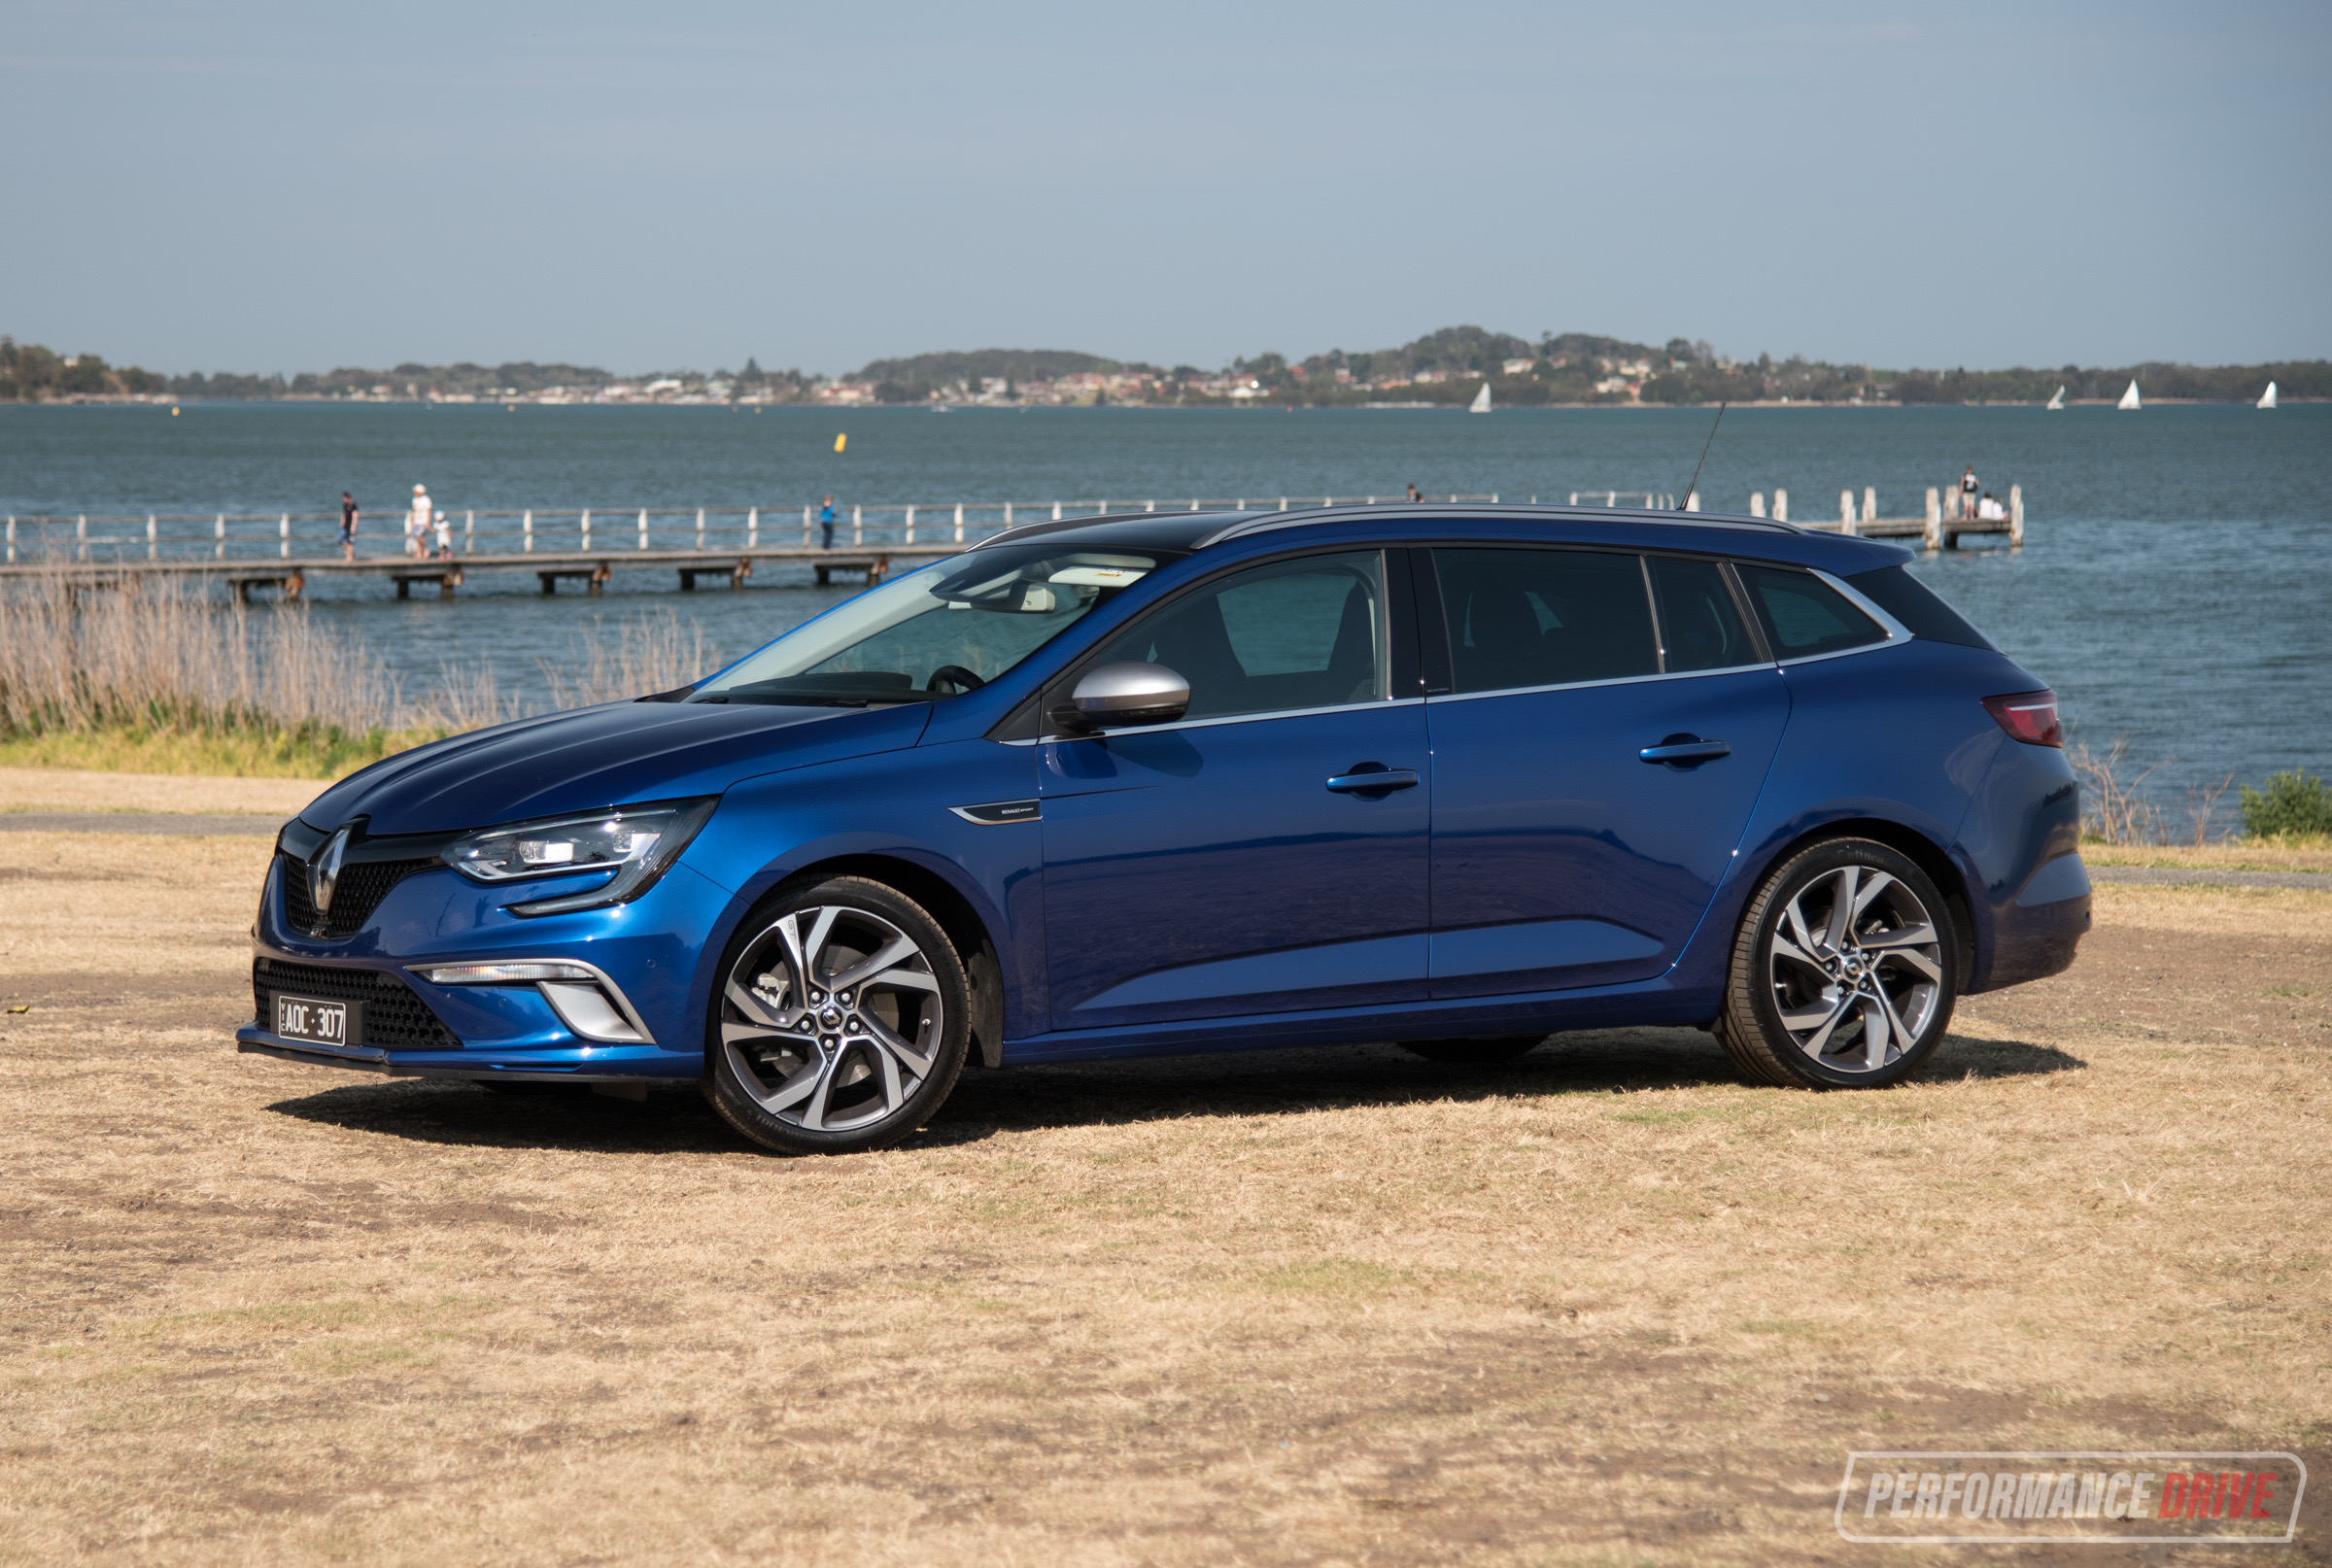 2017 Renault Megane GT wagon review (video)